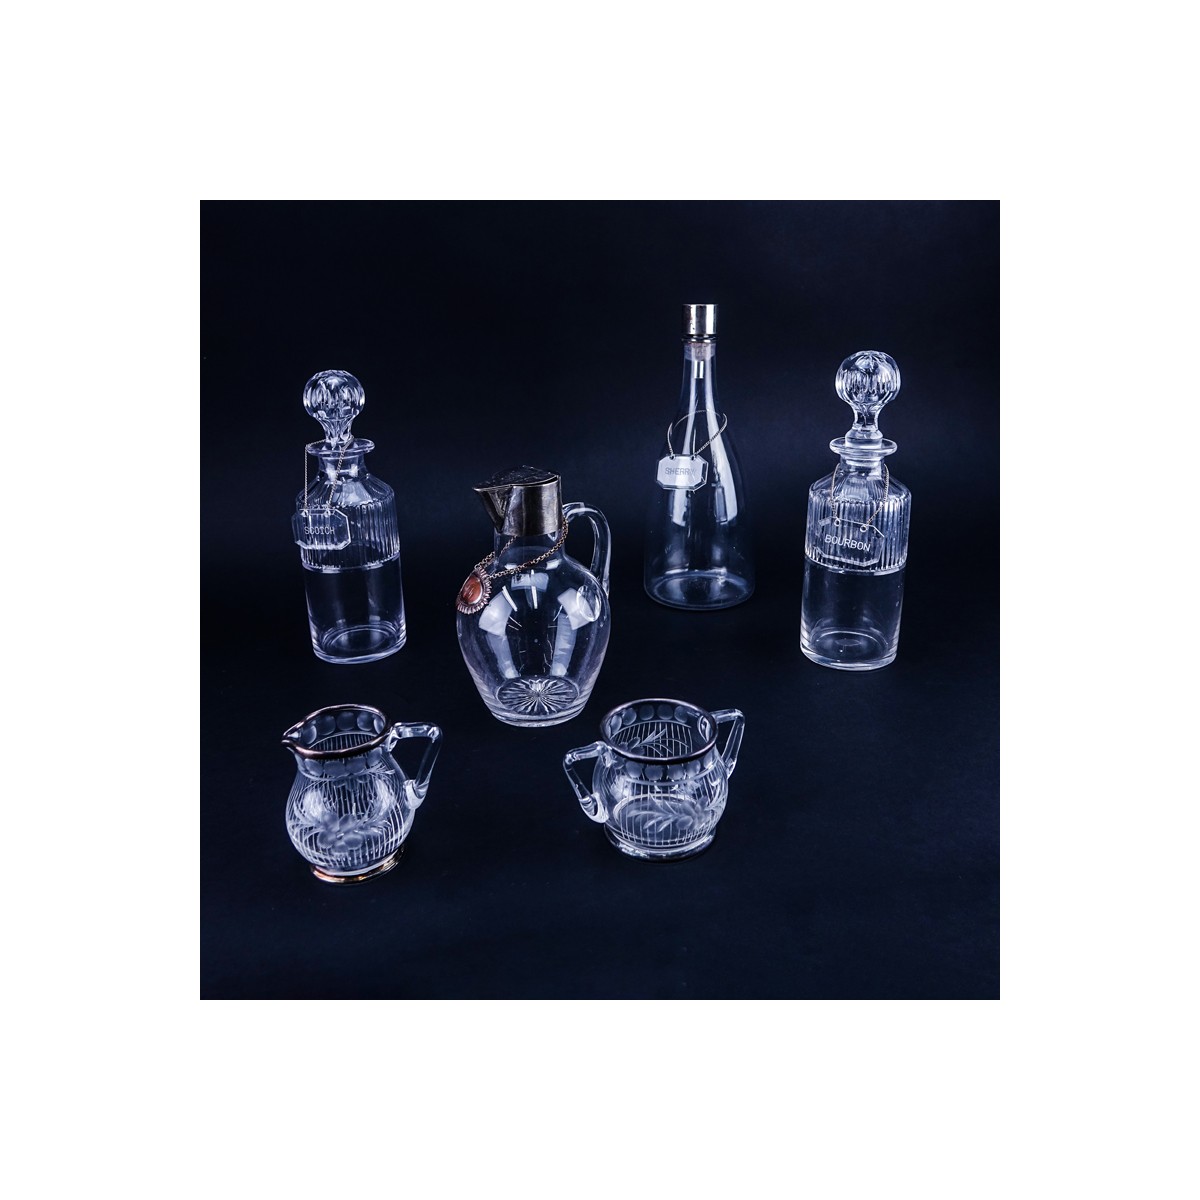 Grouping of Six (6) Vintage Tableware. Includes: Two crystal decanters/cruet bottles, glass pitcher